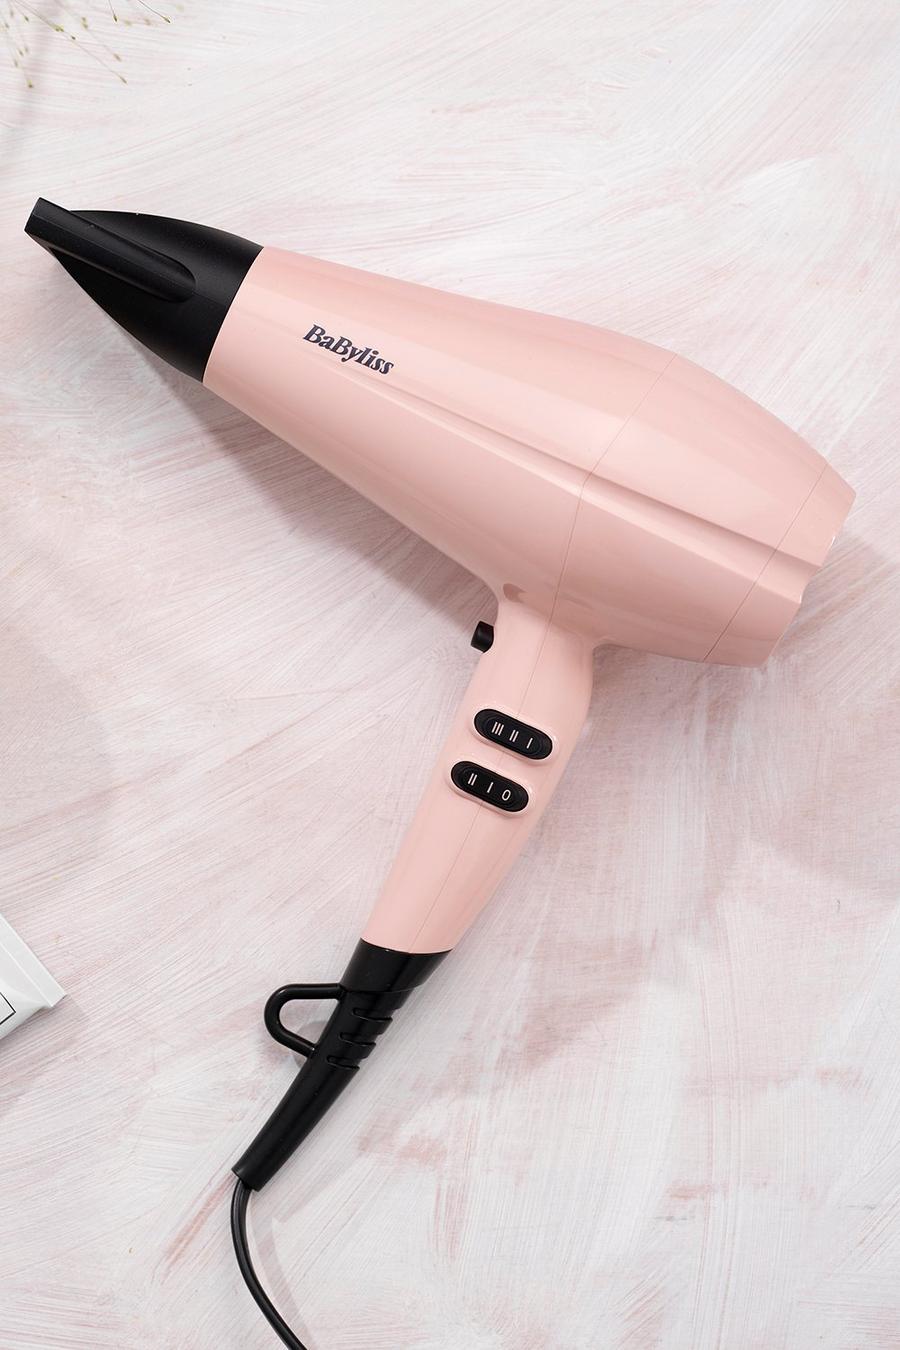 Babyliss - Sèche-cheveux, Rose pink